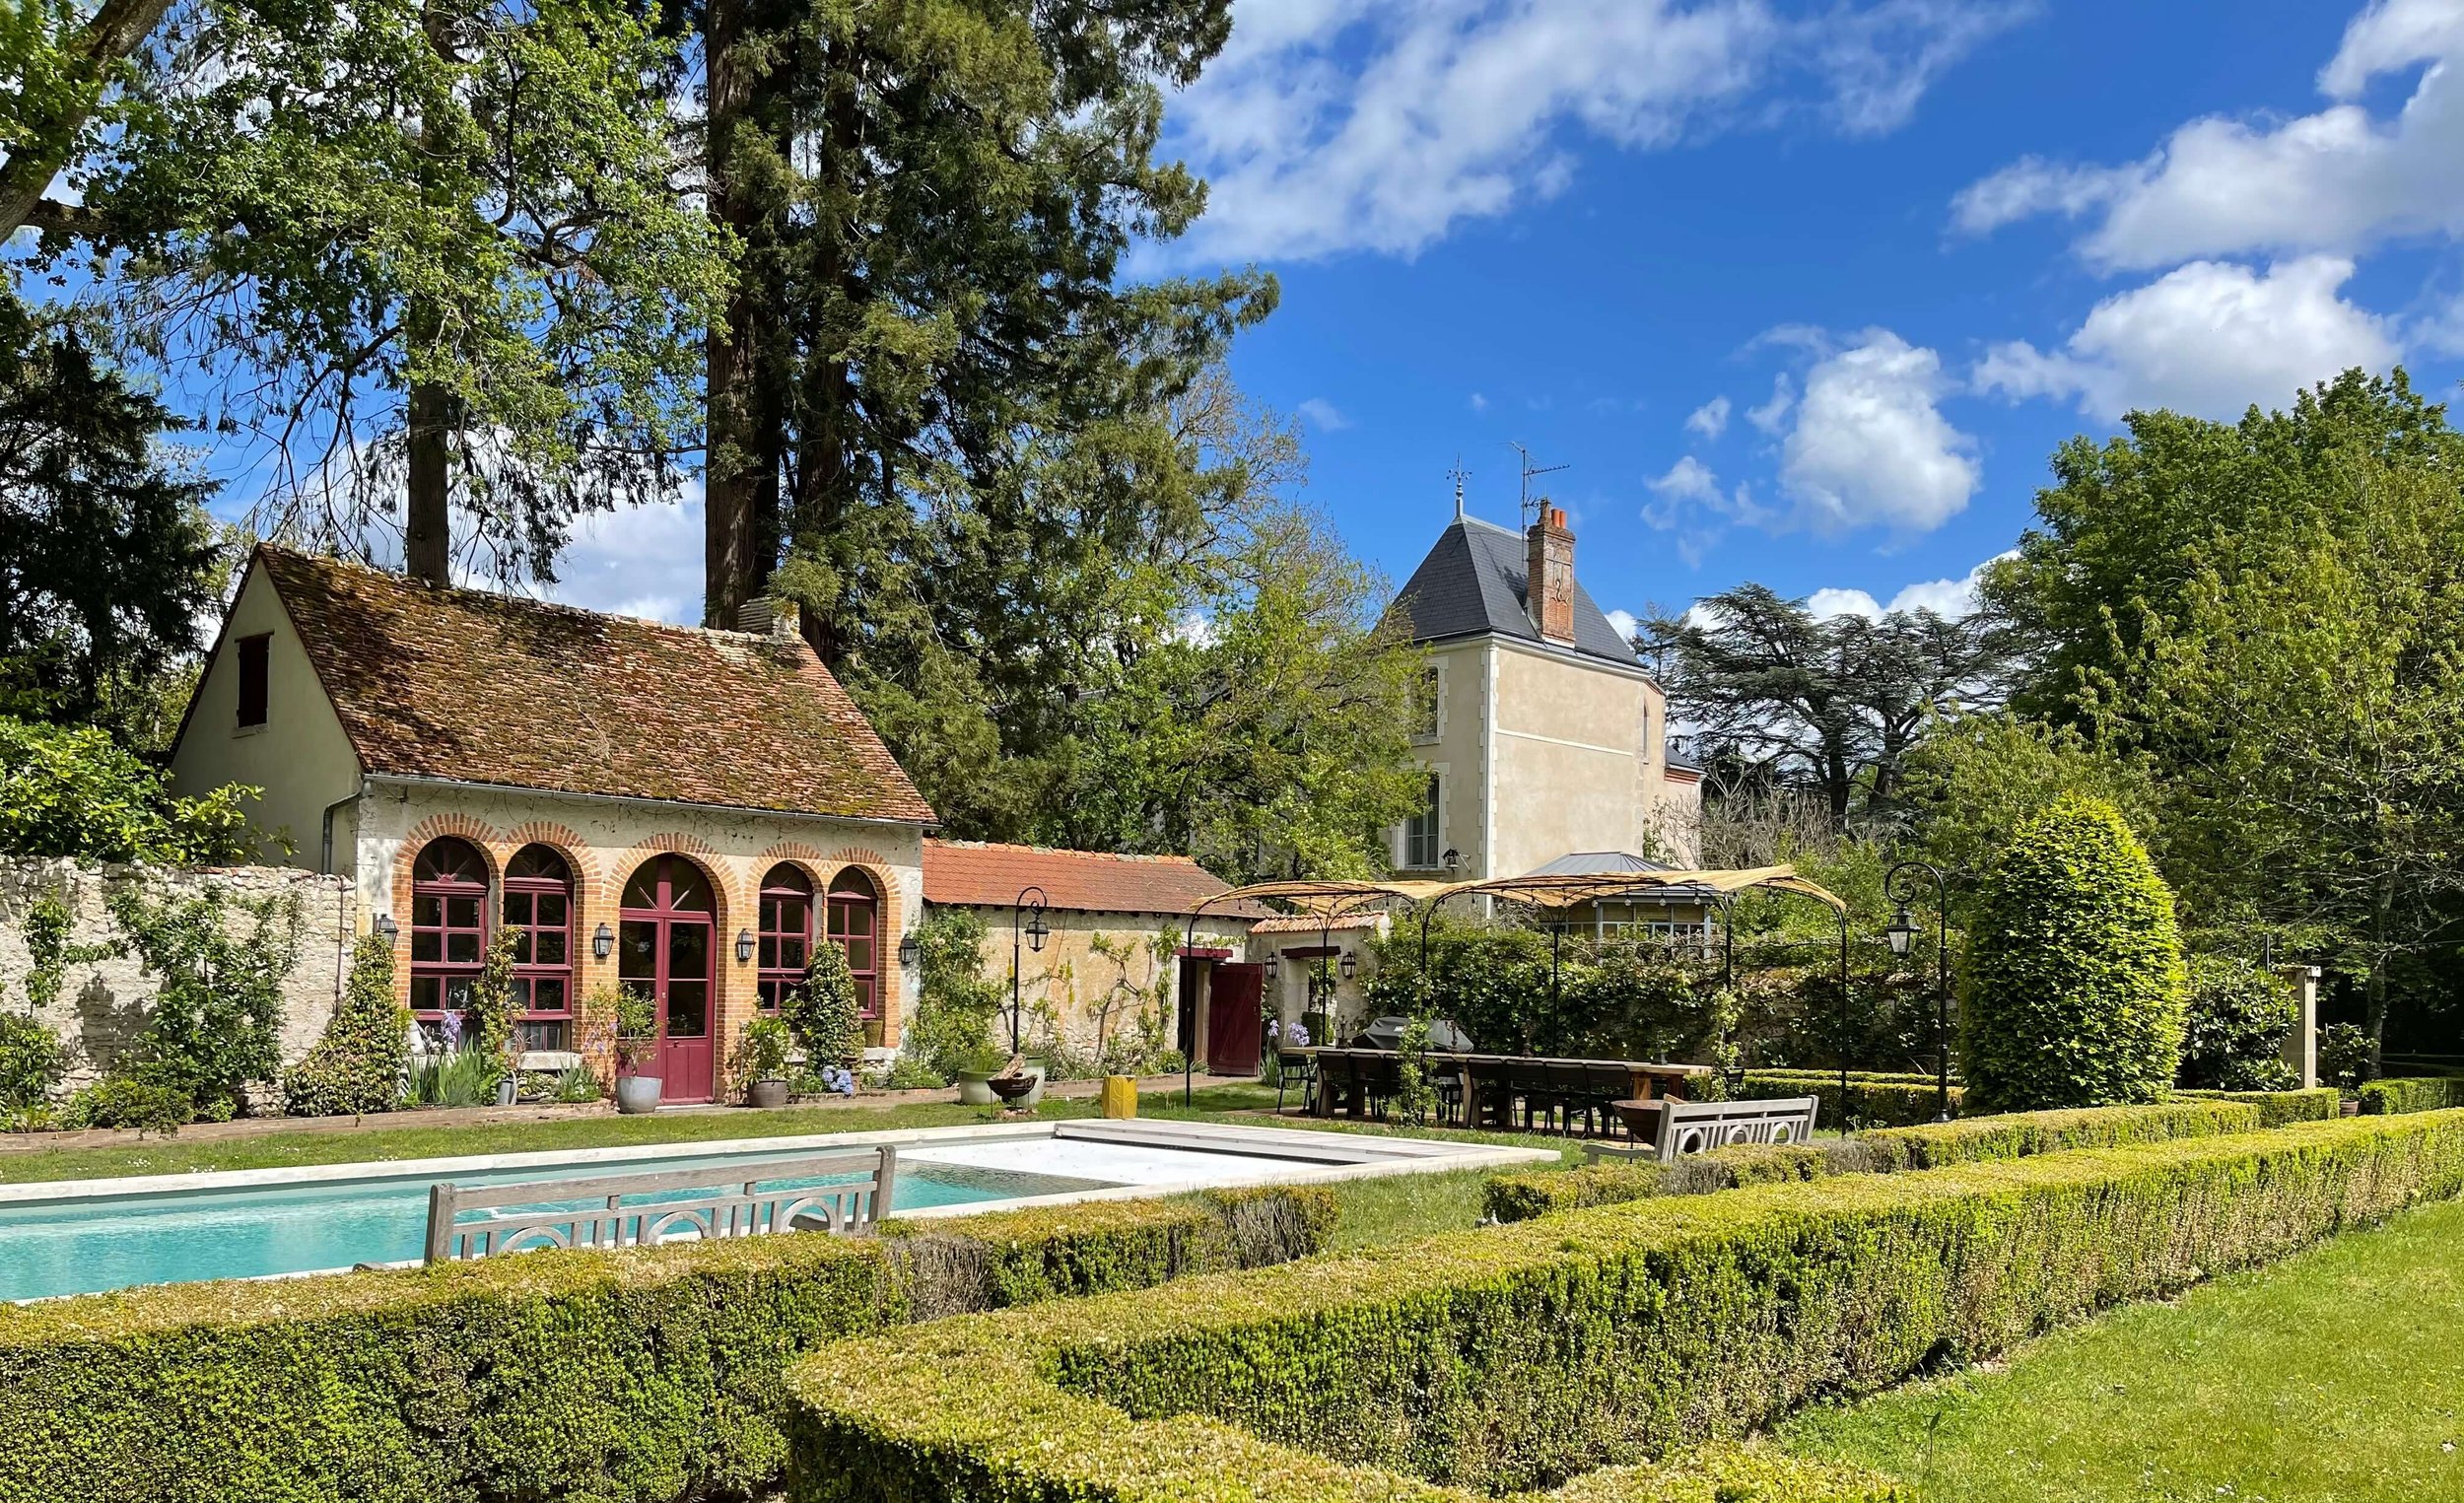 Luxury house in Chambord, in the heart of the countryside and the Loire castles region